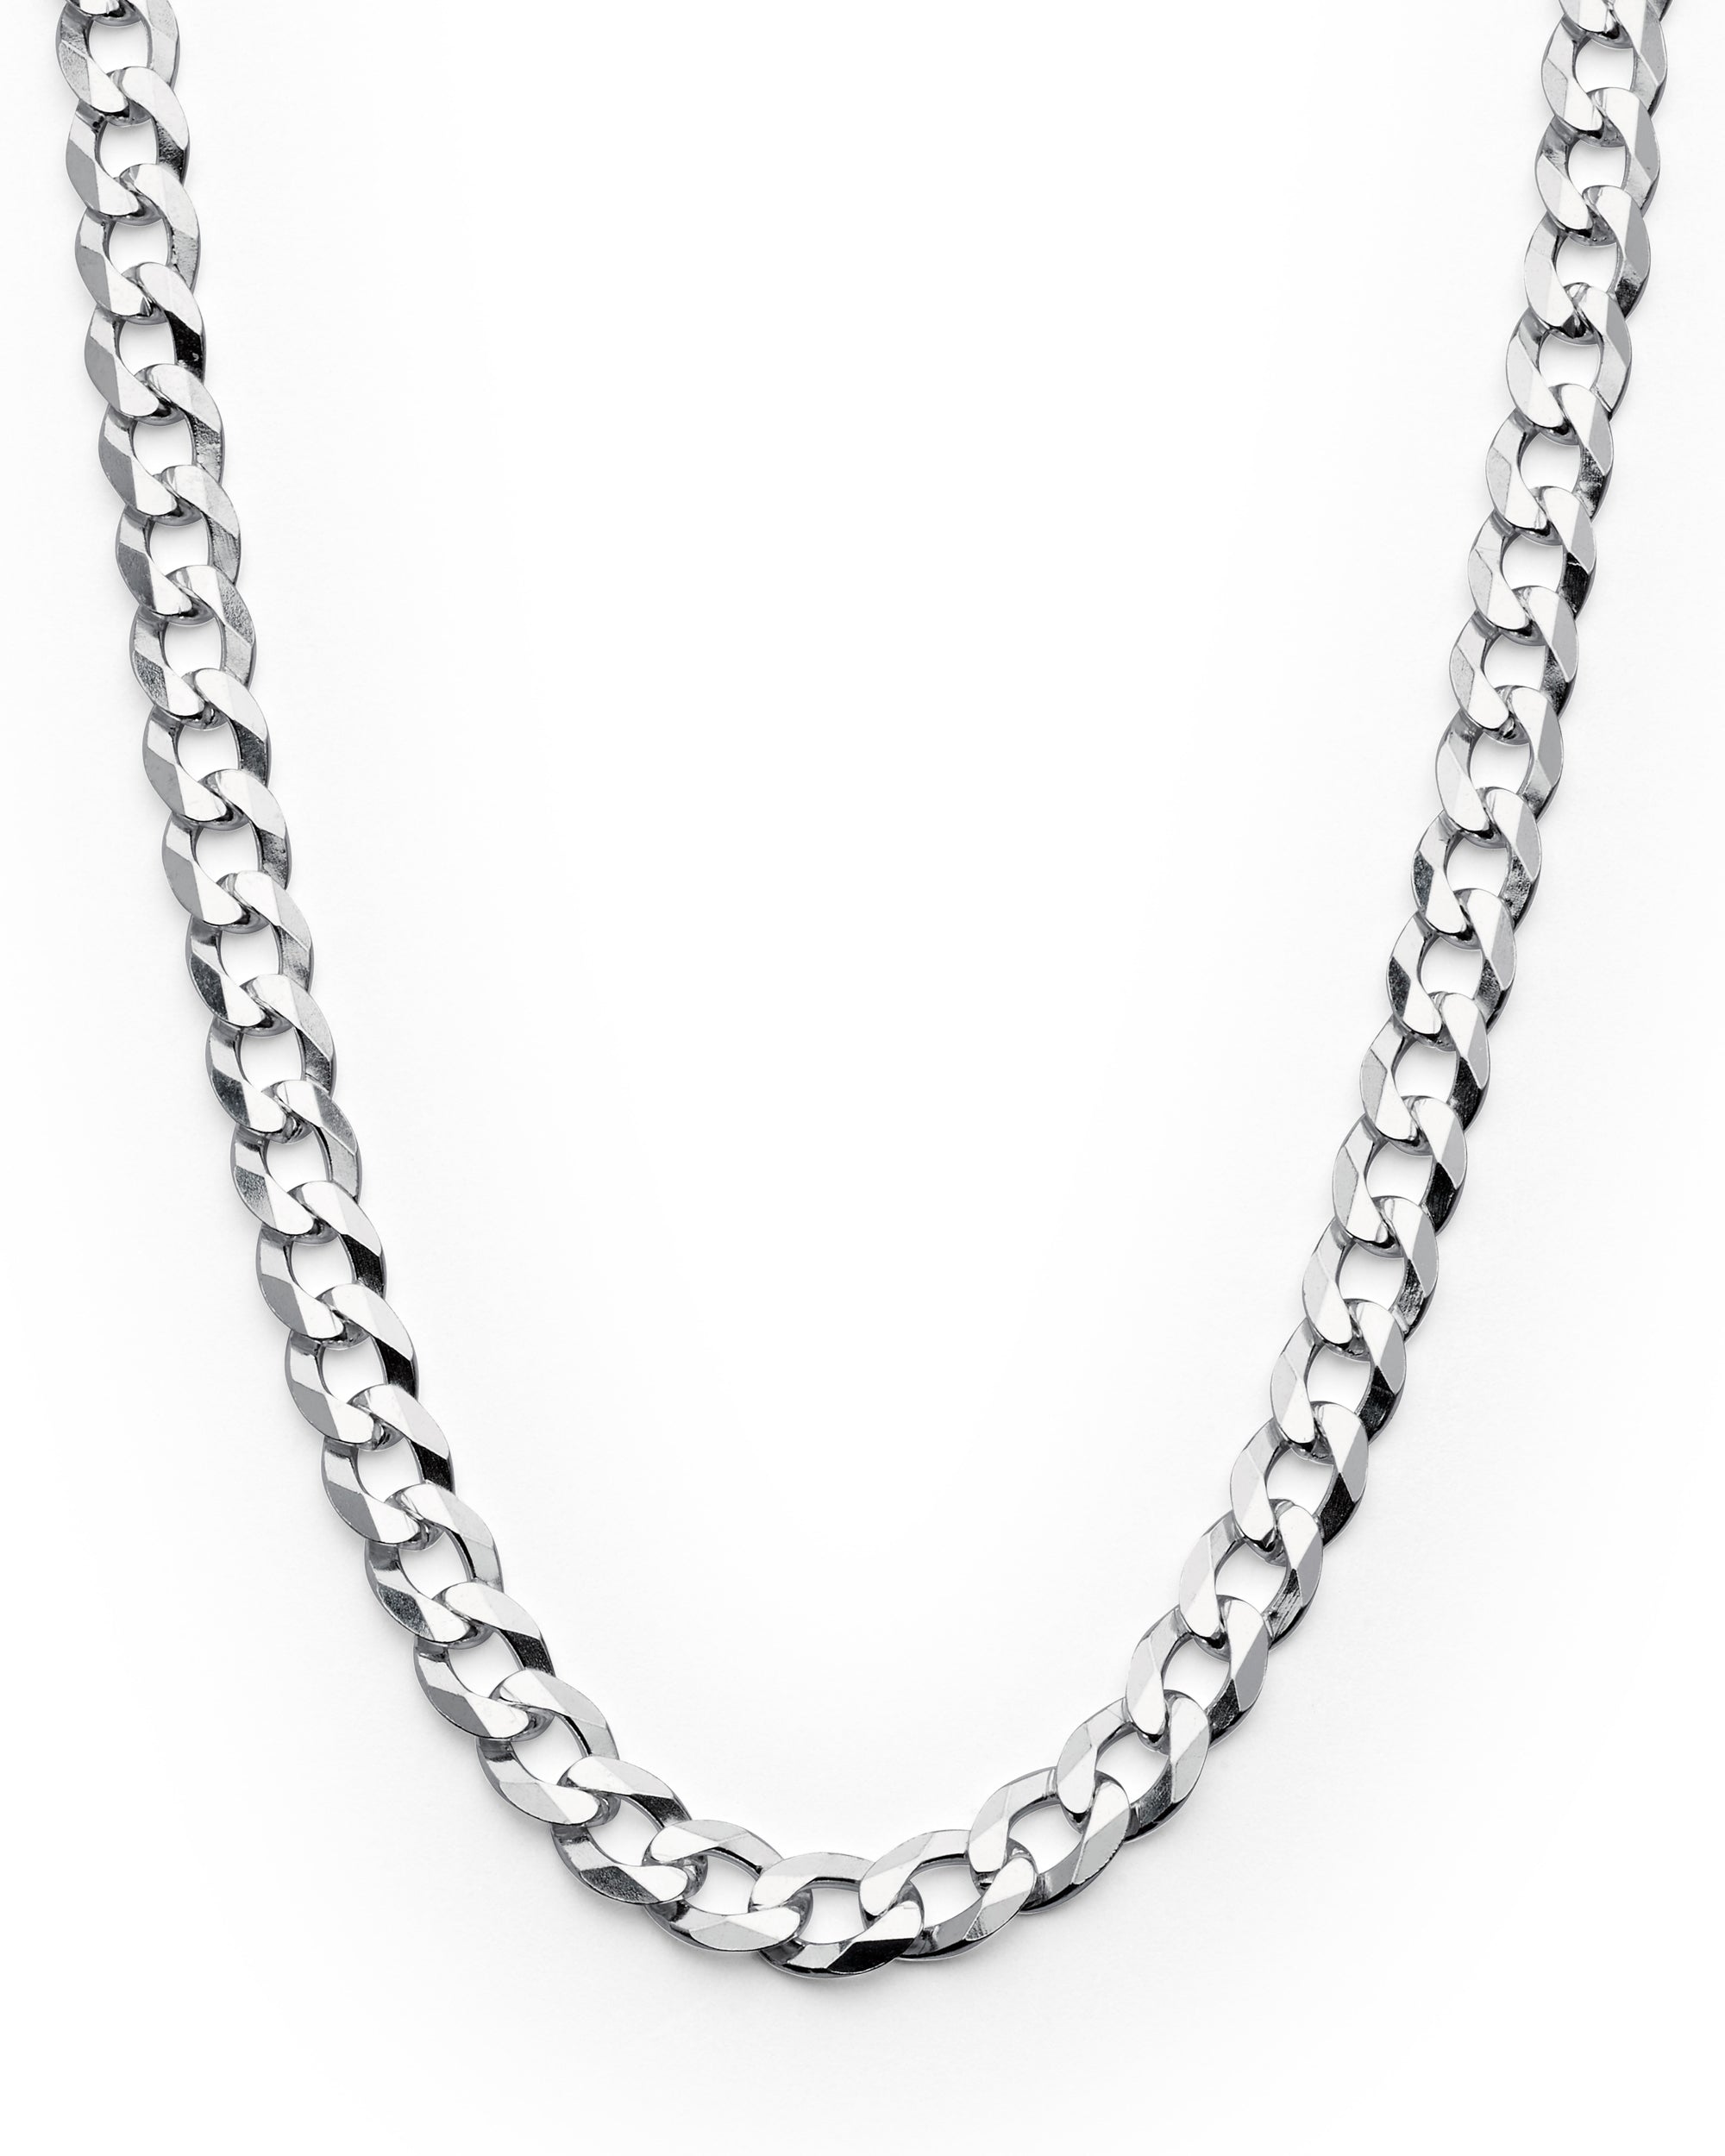 Men's 3.5MM Sterling Silver 925 Italian Curb Chain Necklace 16 18